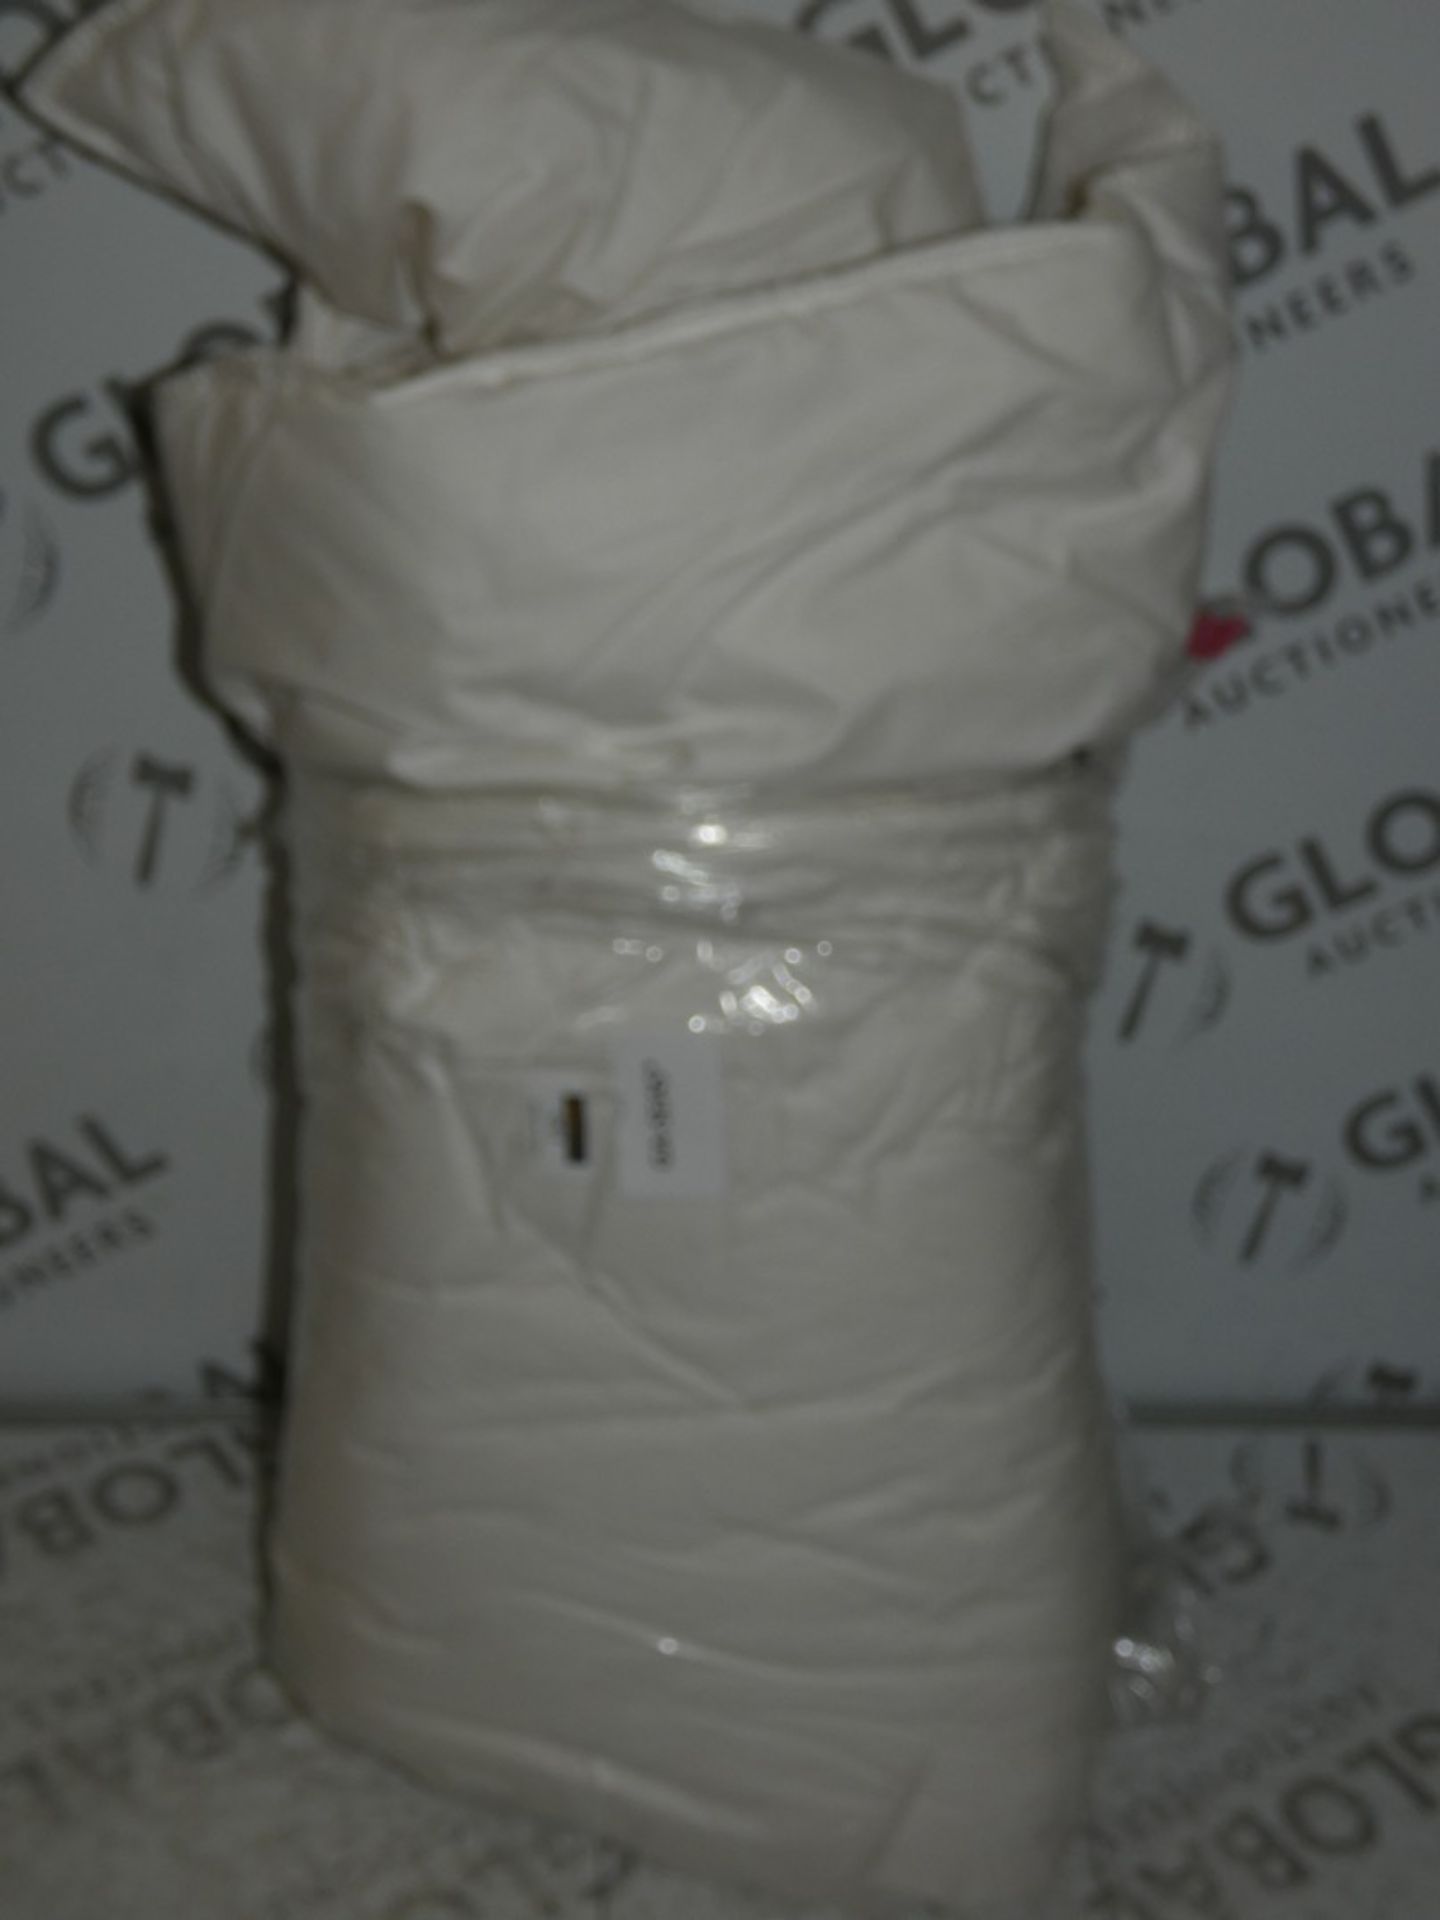 Bagged Devon Duvet Pure Wool Filled Mattress Topper (Viewing or Appraisals Highly Recommended)